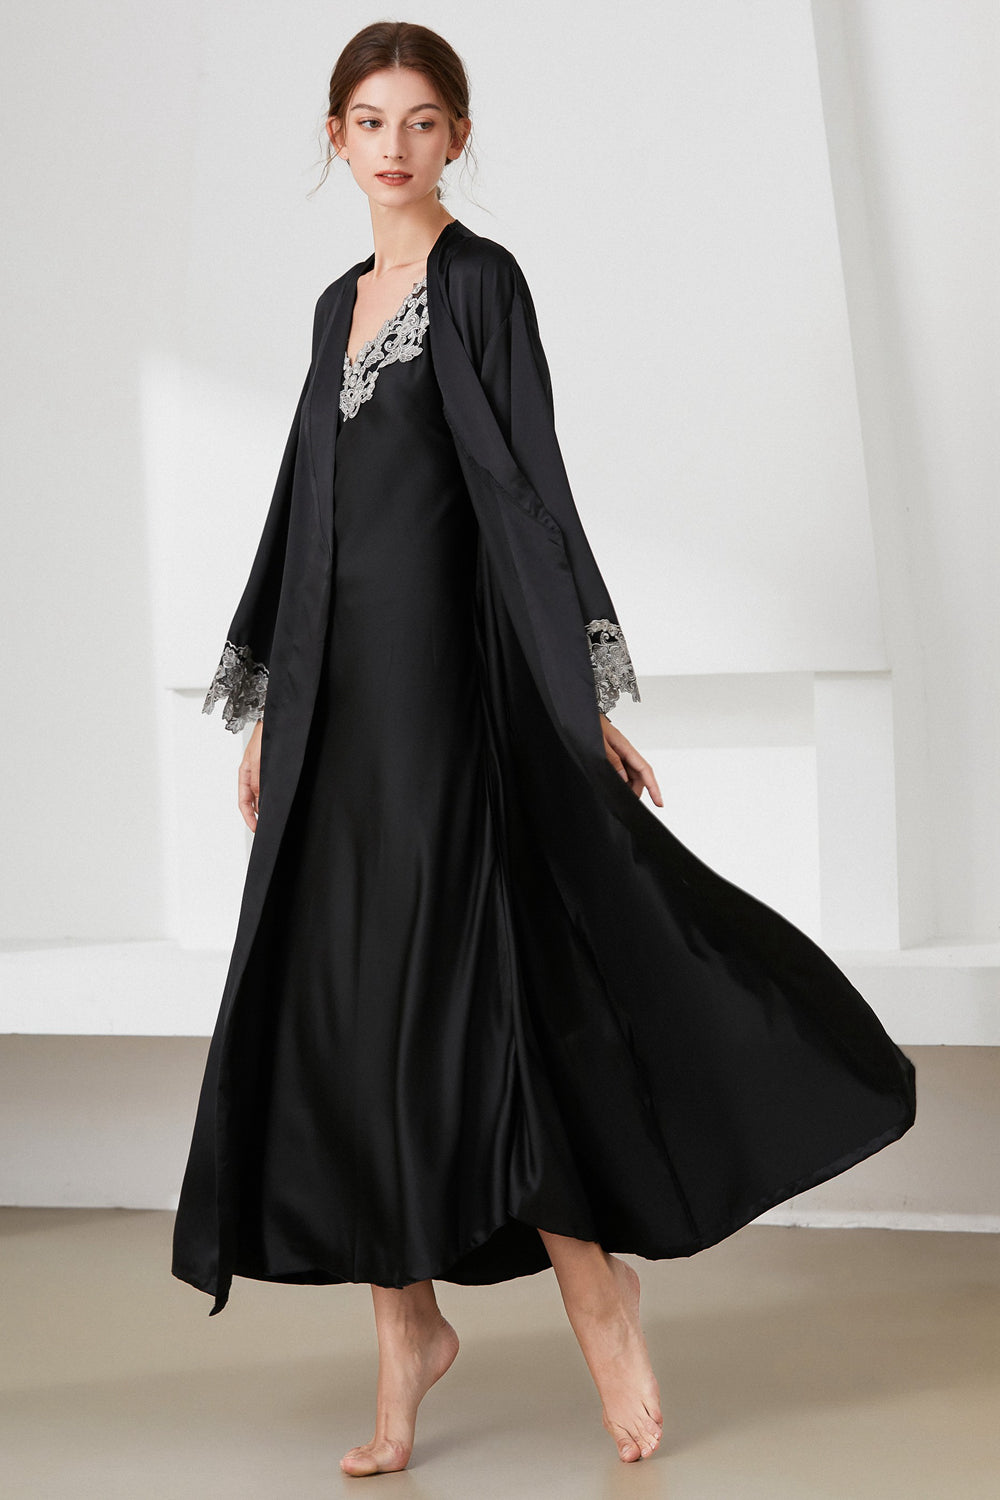 Contrast Lace Trim Satin Night Dress and Robe Set – The Gypsy Den